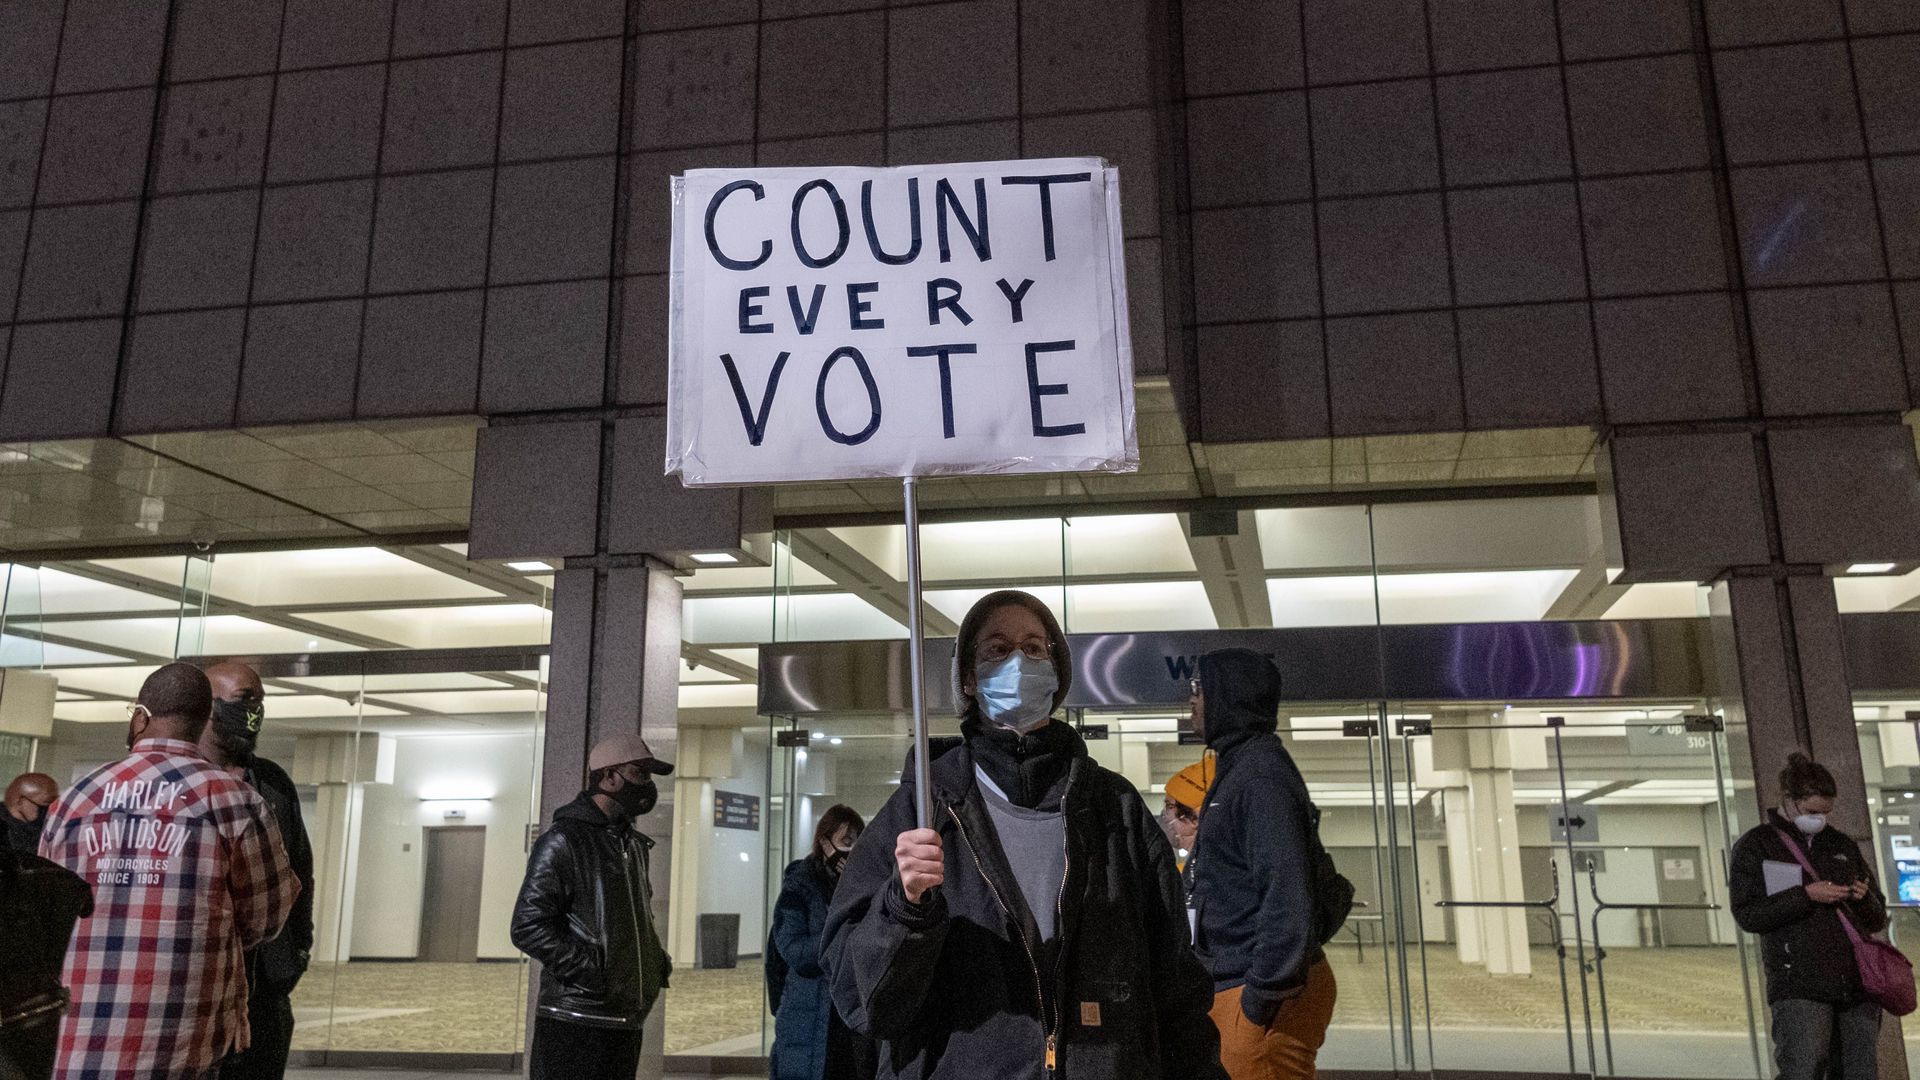 A protester holds a "Count every vote" sign outside of the TCF center where ballots are being counted in downtown Detroit, Michigan on November 4, 2020.